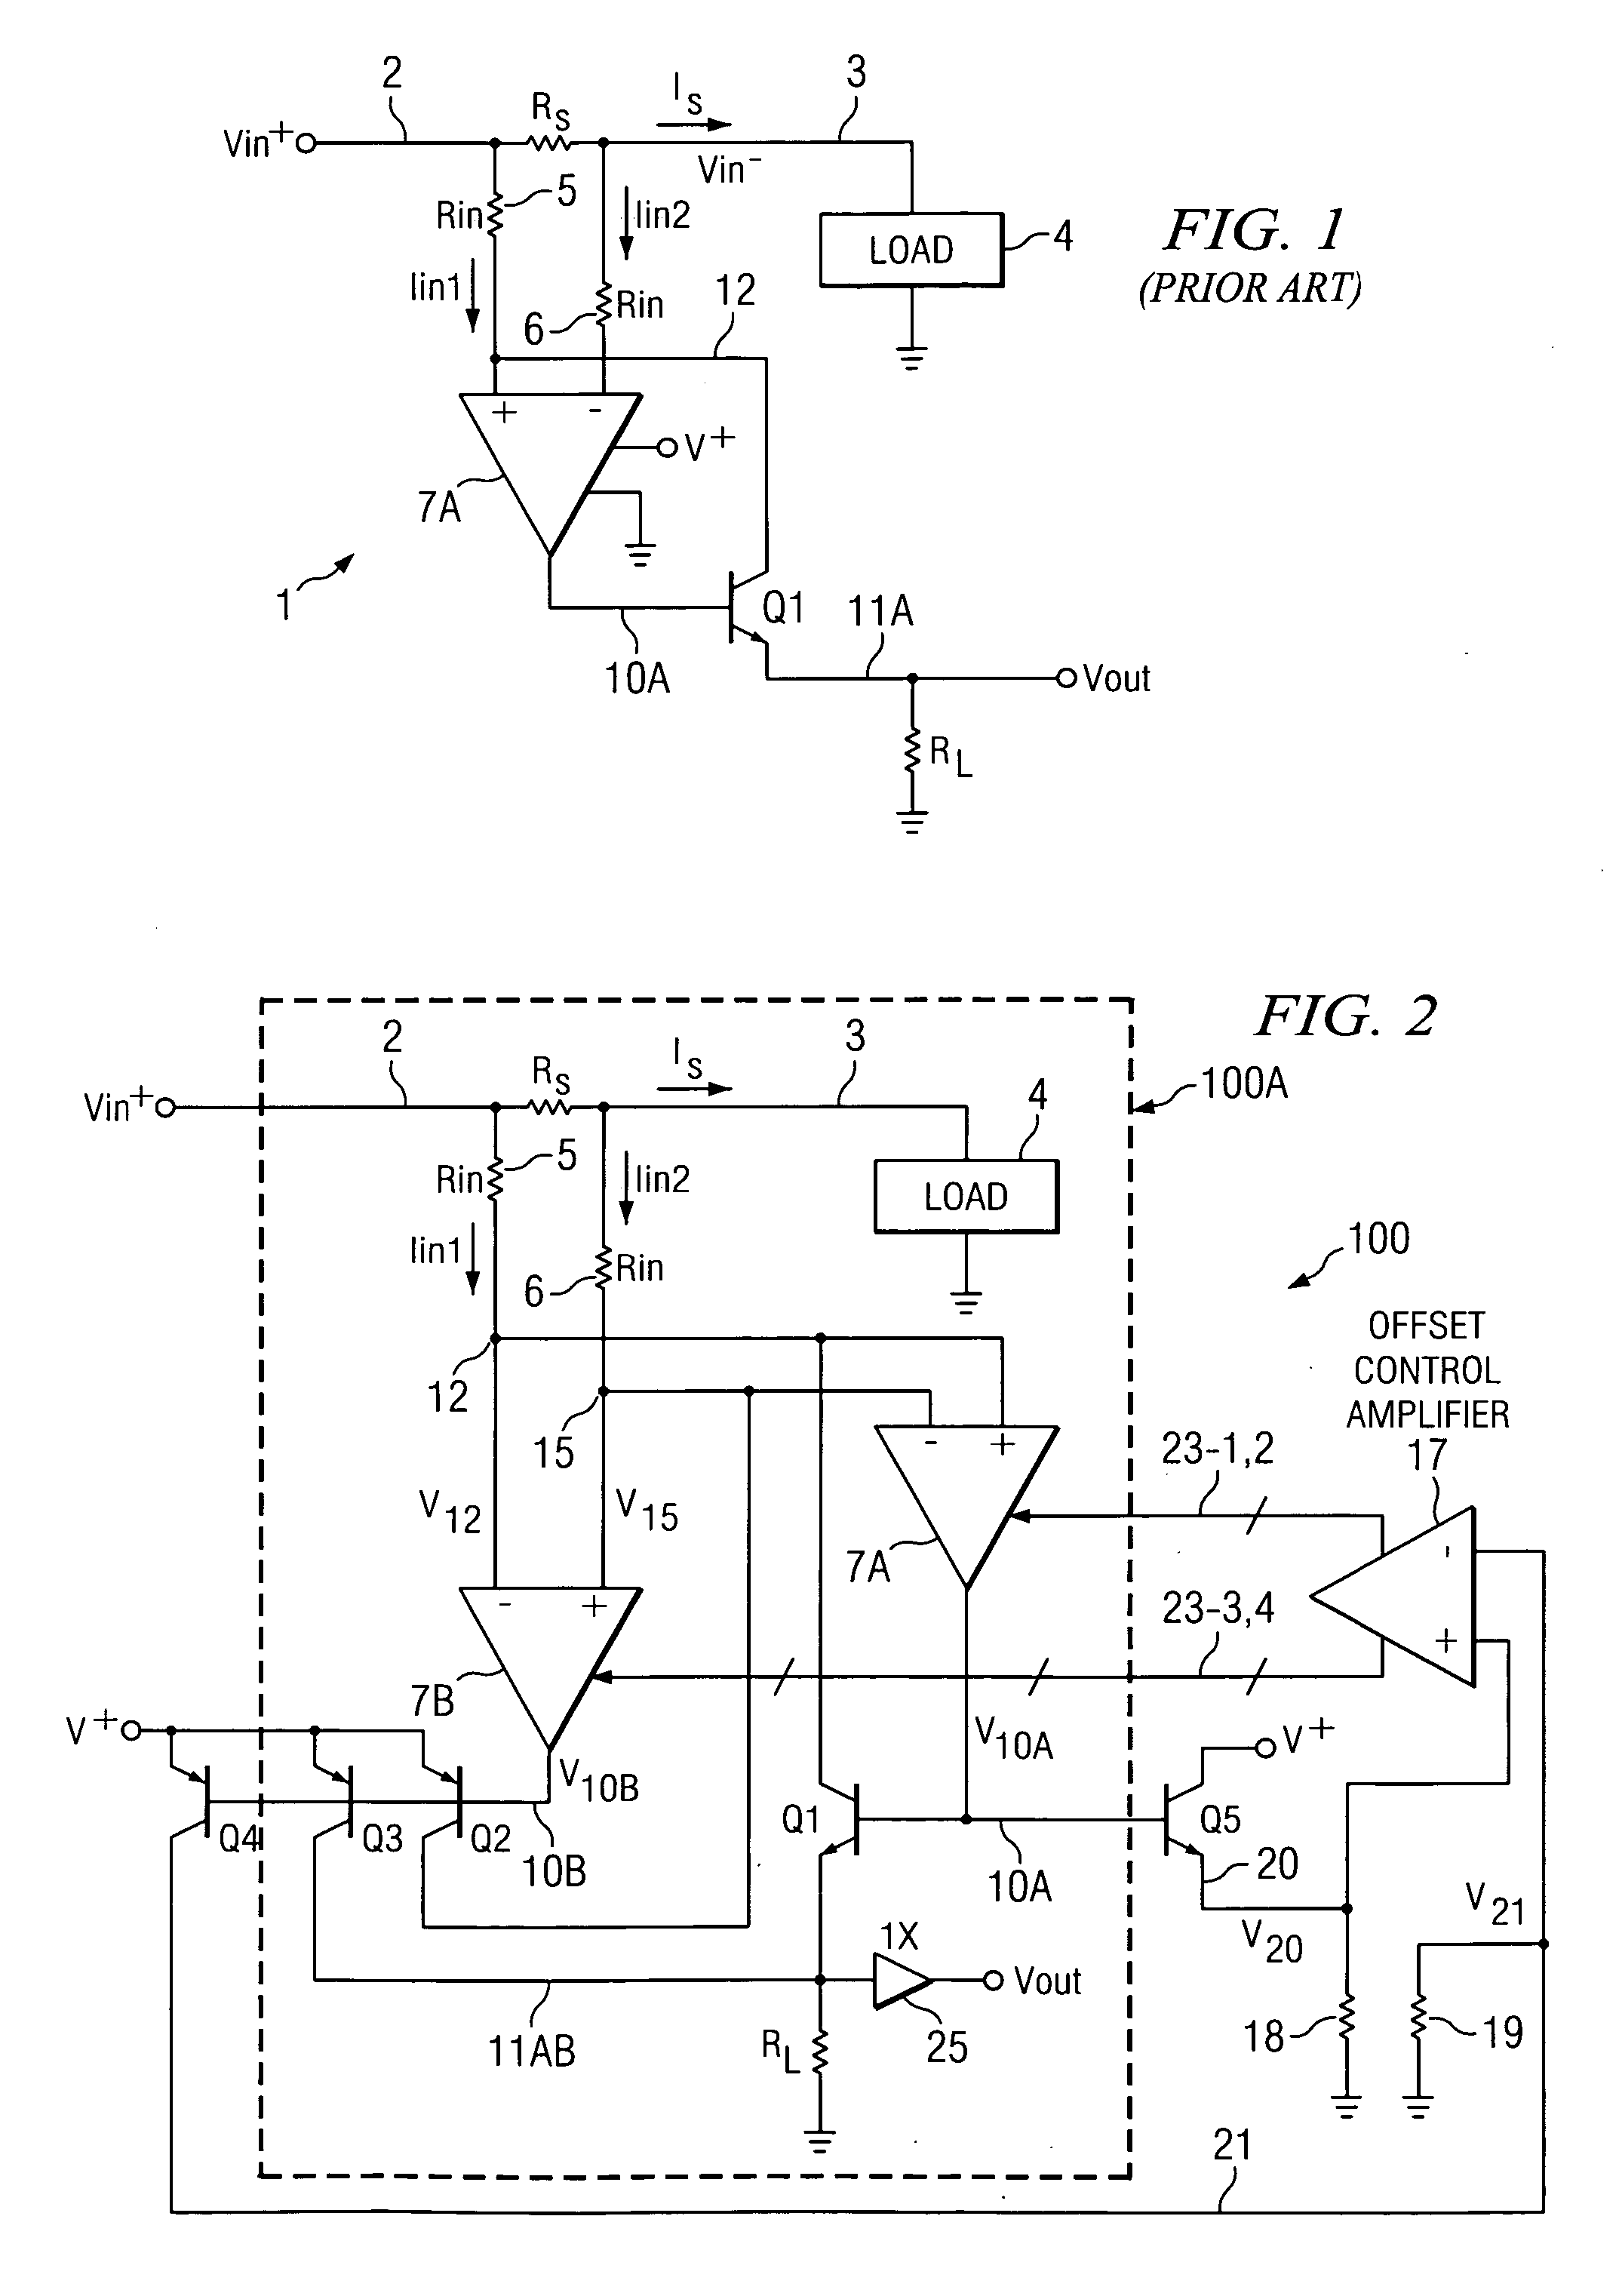 Amplifier switching control circuit and method for current shunt instrumentation amplifier having extended position and negative input common mode range